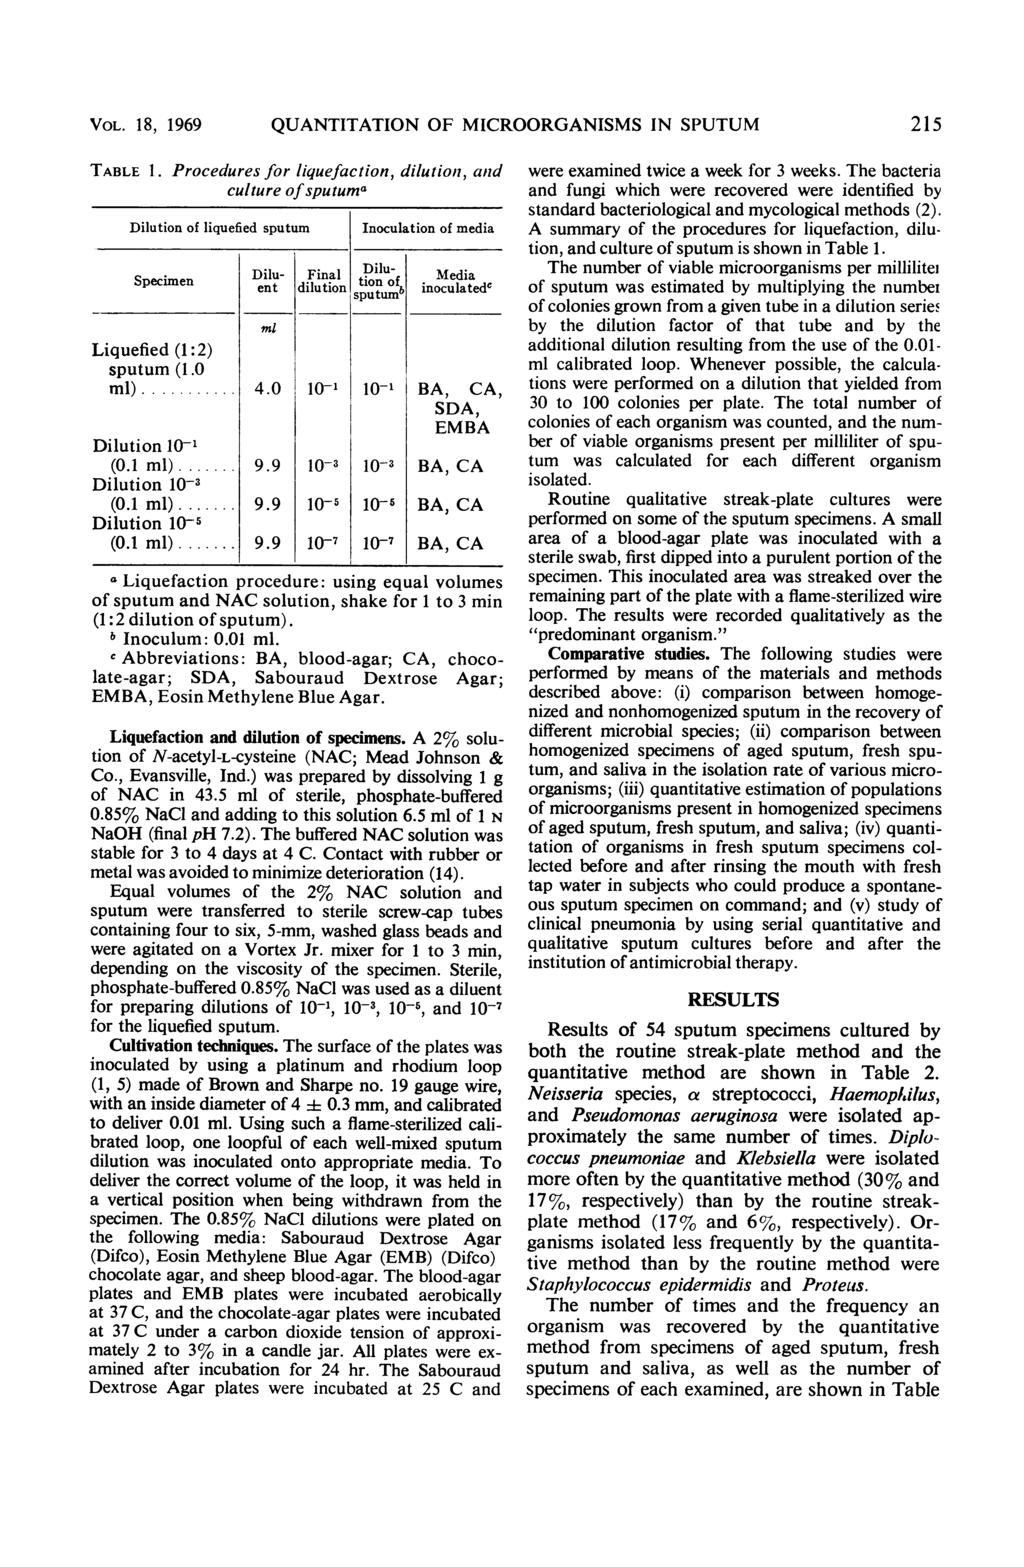 9l-3 VOL. 18, 1969 QUANTITATION OF MICROORGANISMS IN SPUTUM 215 TABLE 1. Procedures for liquefaction, dilution, and were examined twice a week for 3 weeks.